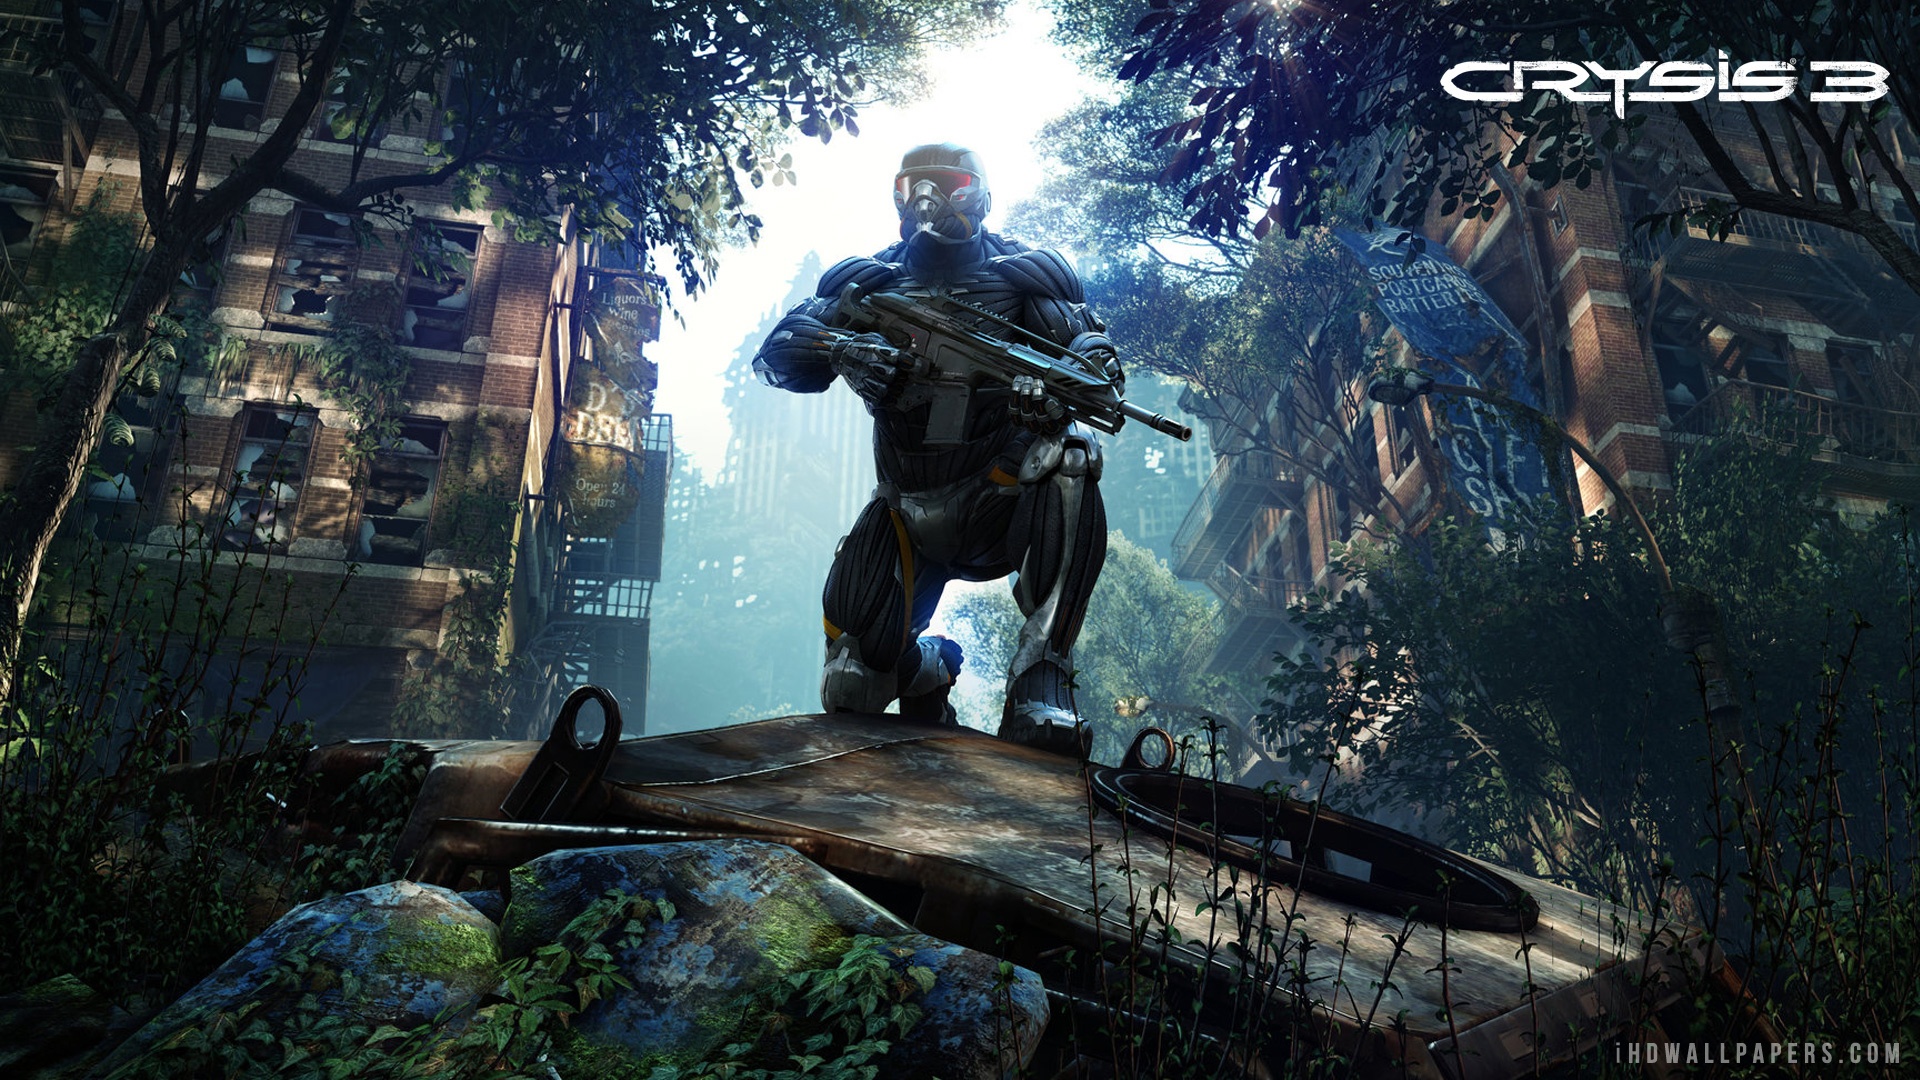 Description Crysis Wallpaper Background In HD